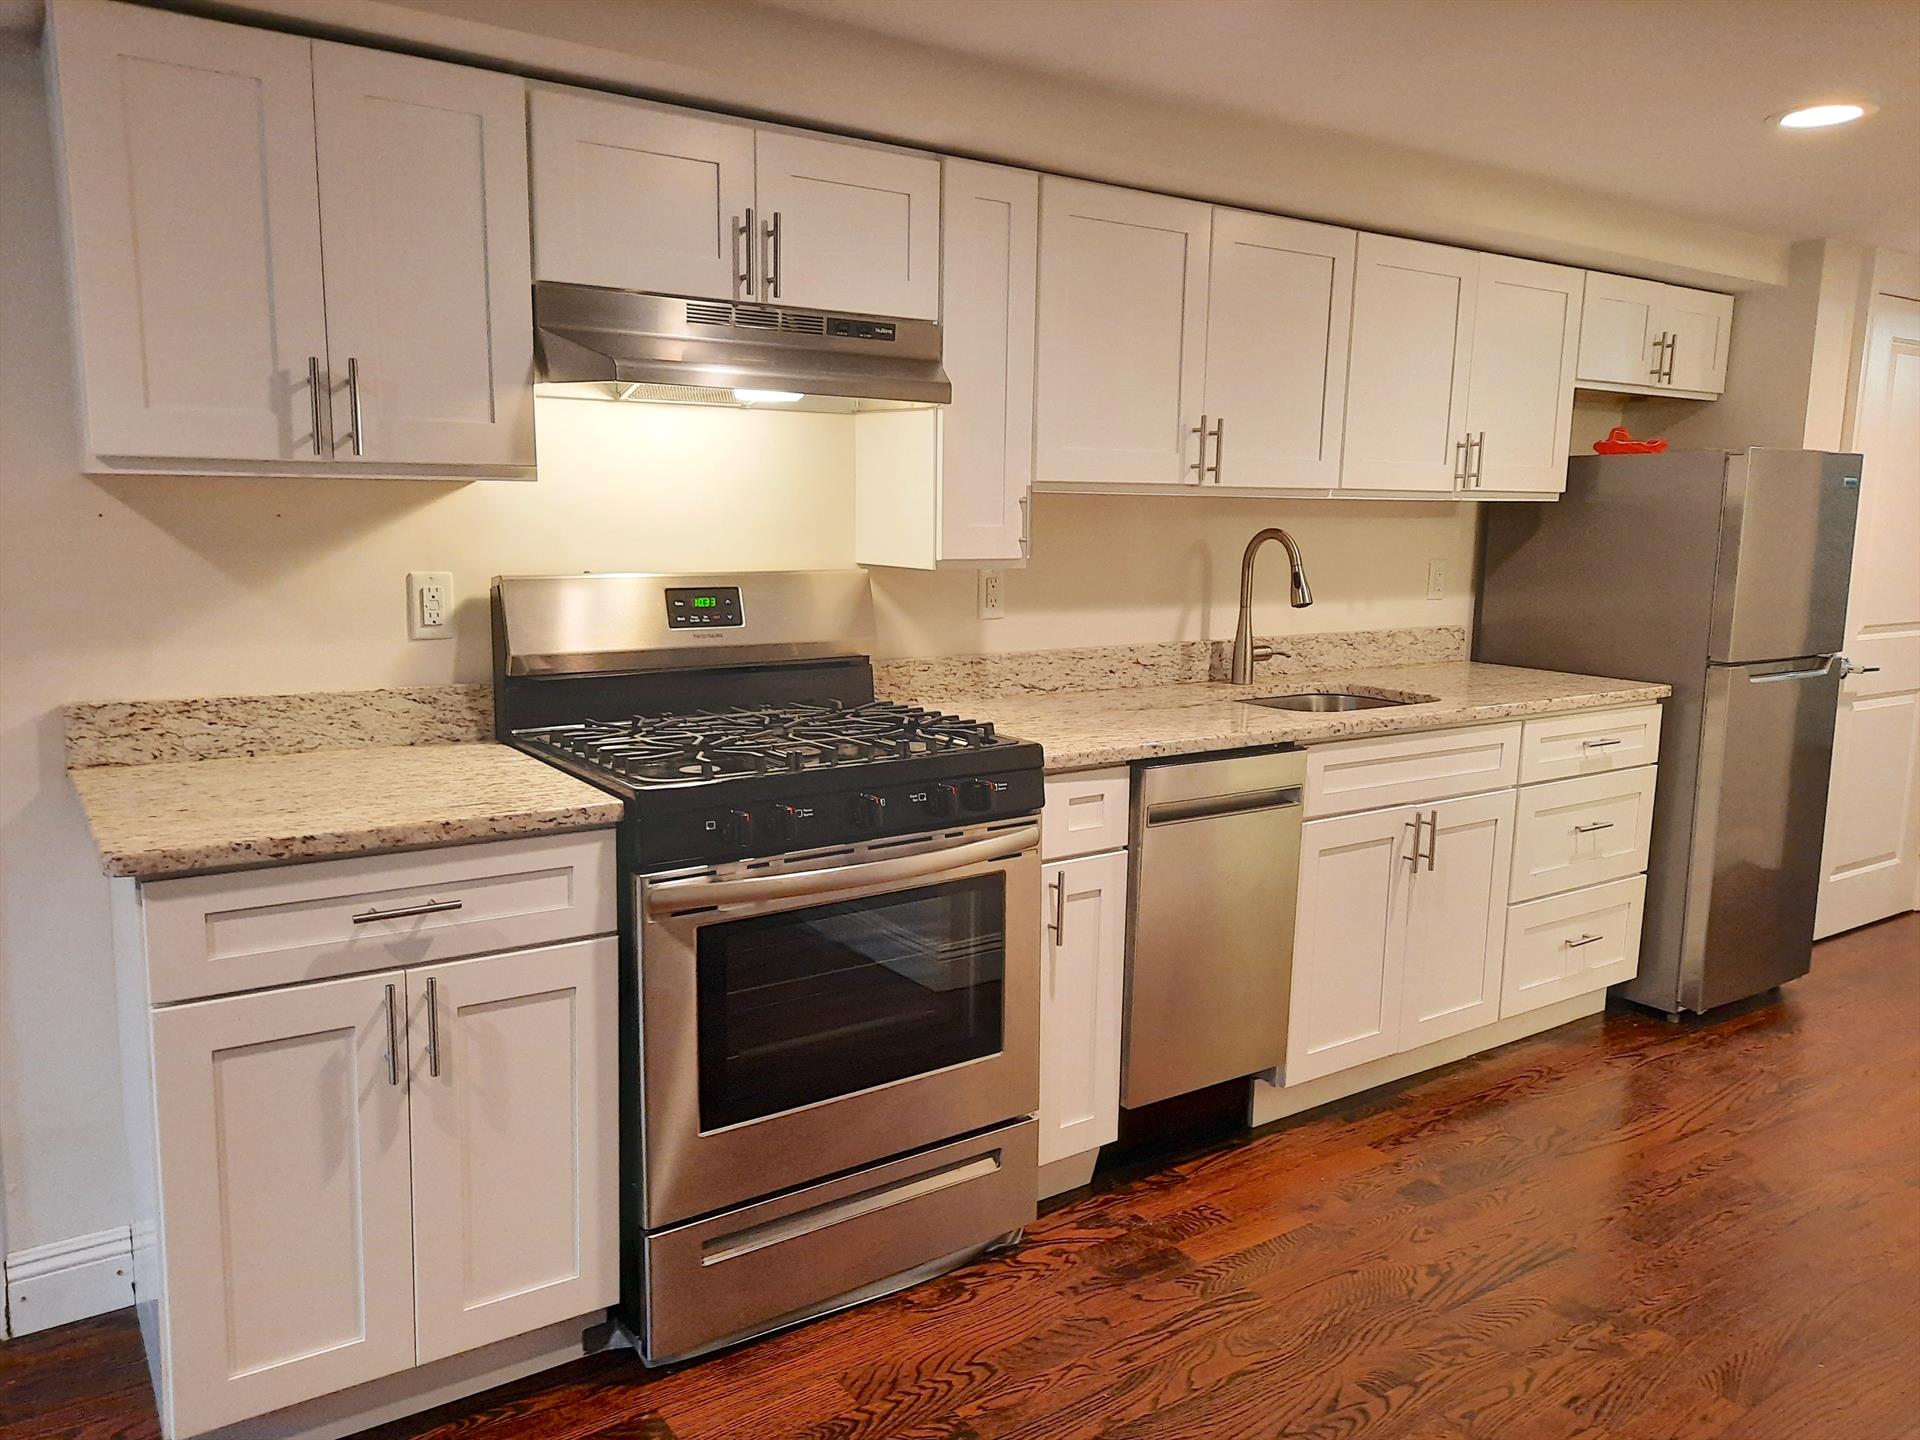 Move into this recently renovated midtown Hoboken 1 bedroom rental located close to the Hoboken waterfront. Features: rich cherry oak hardwood floors throughout, modern open kitchen with stainless steel appliances, granite counters, subway tile backsplash, living room (16.4' x 10'), separate bedroom with closet (10.5' x 9.5'), full bathroom with tub, private washer / dryer, exposed brick, crown molding, GARDEN LEVEL (basement), common yard, 2 blocks off of the Washington Street, close to restaurants, shopping, the Hoboken waterfront, parks, pubs, and public transportation to NYC and other parts. Tenants pays their own utilities. AVAILABLE DECEMBER 15th. NO PETS. Street parking. To make this apartment yours: $2350 (1st months rent), $3525 (security deposit), $2350 (broker fee), $50 (credit check per adult).